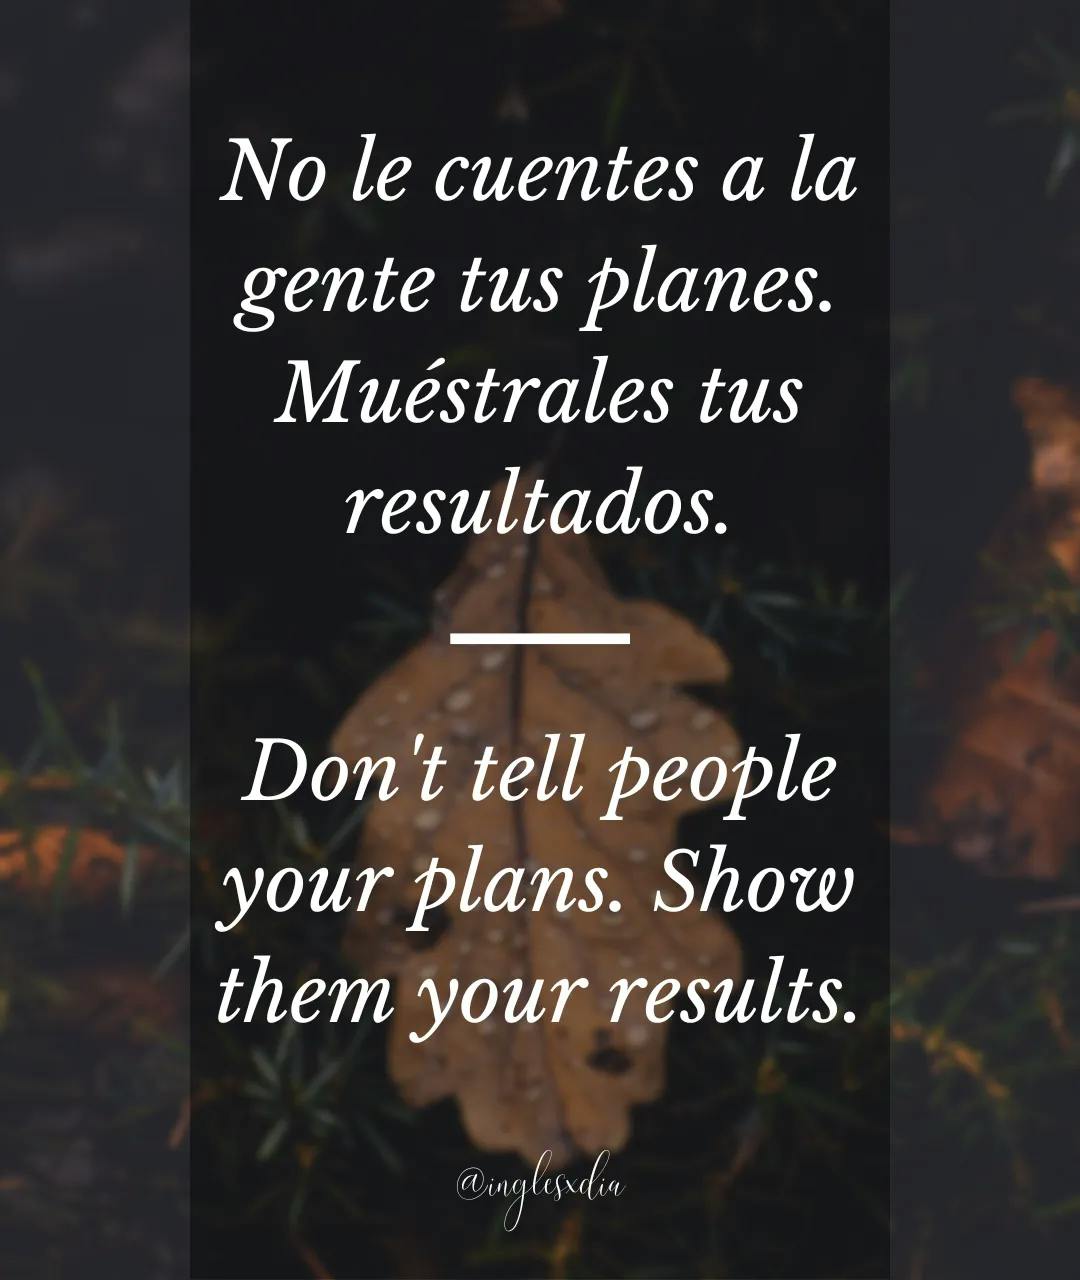 Frases motivadoras en inglés: Don't tell people your plans. Show them your results.